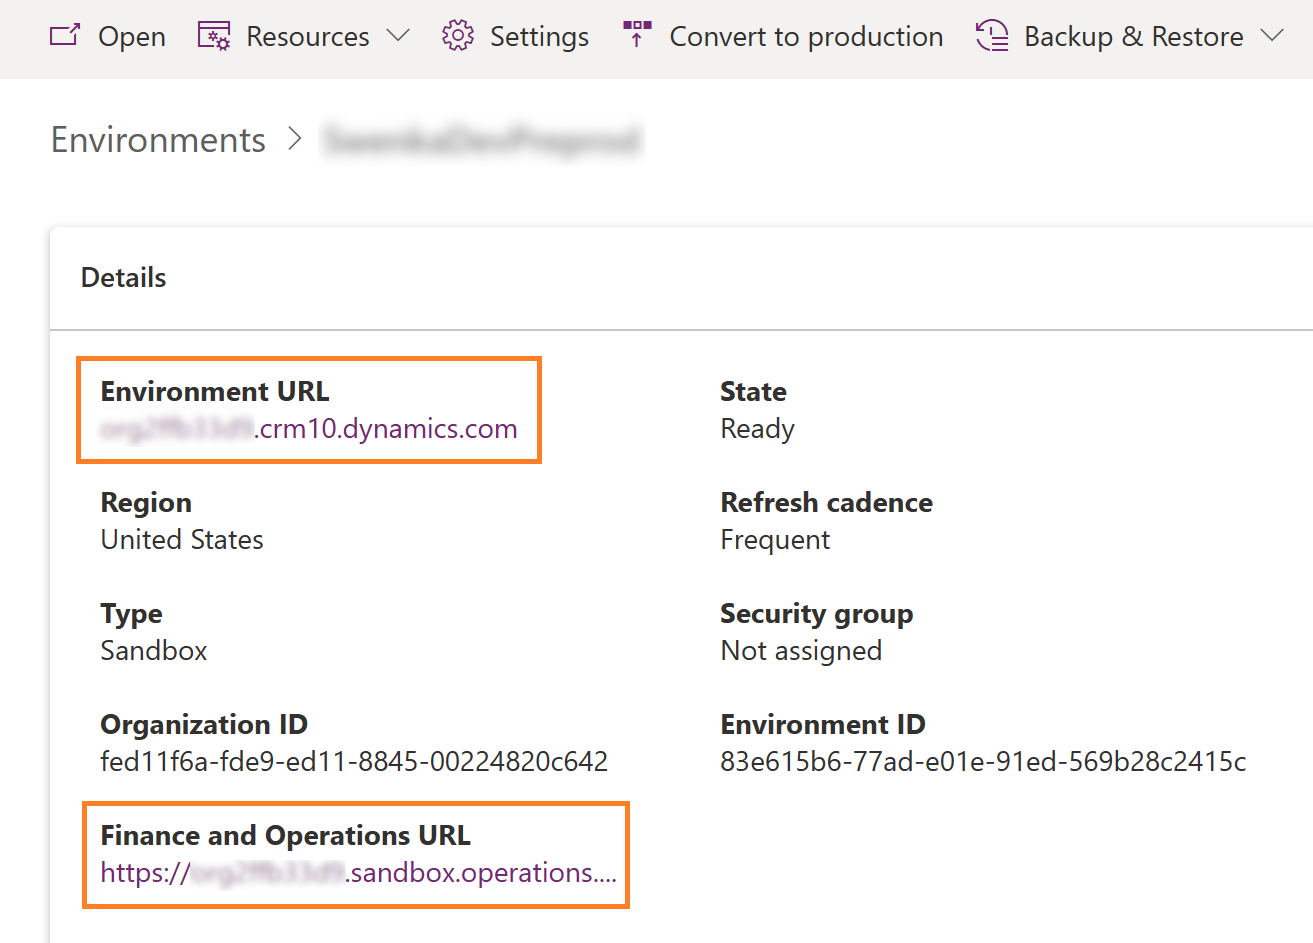 Screenshot that shows two URLs for customer engagement and finance and operations apps in your environment.